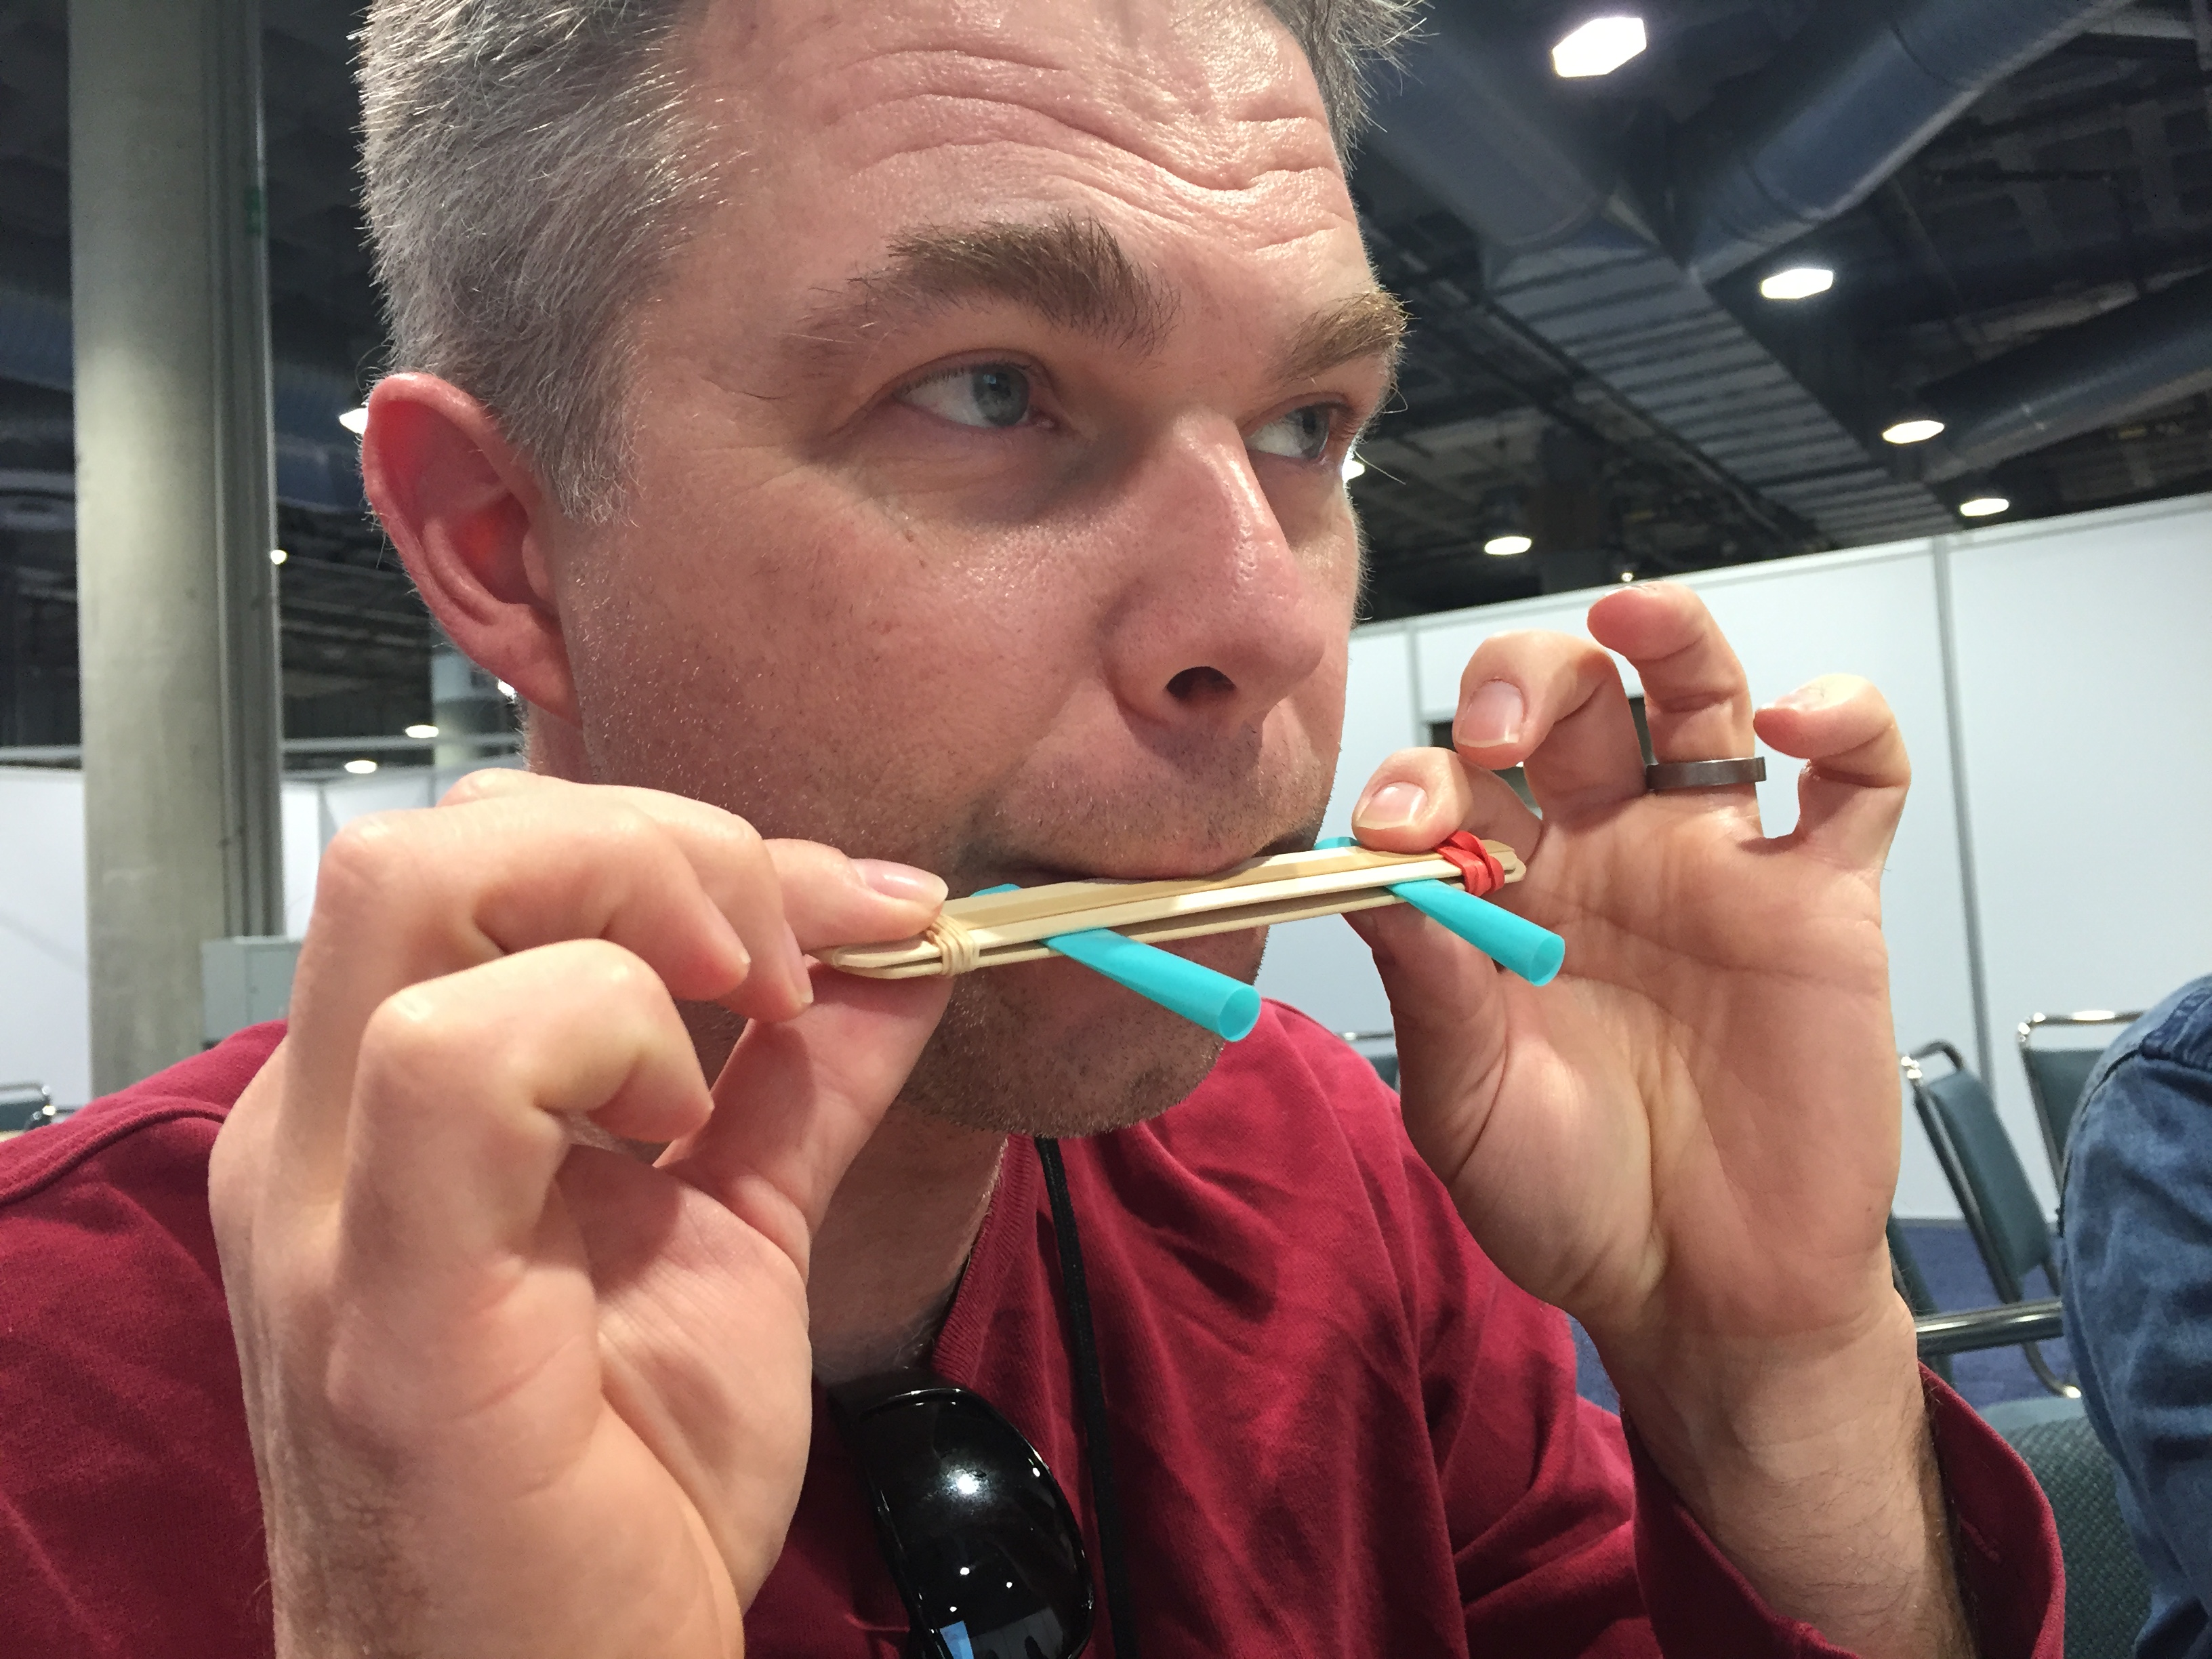 Make a buzz with rubber bands and tongue depressors.